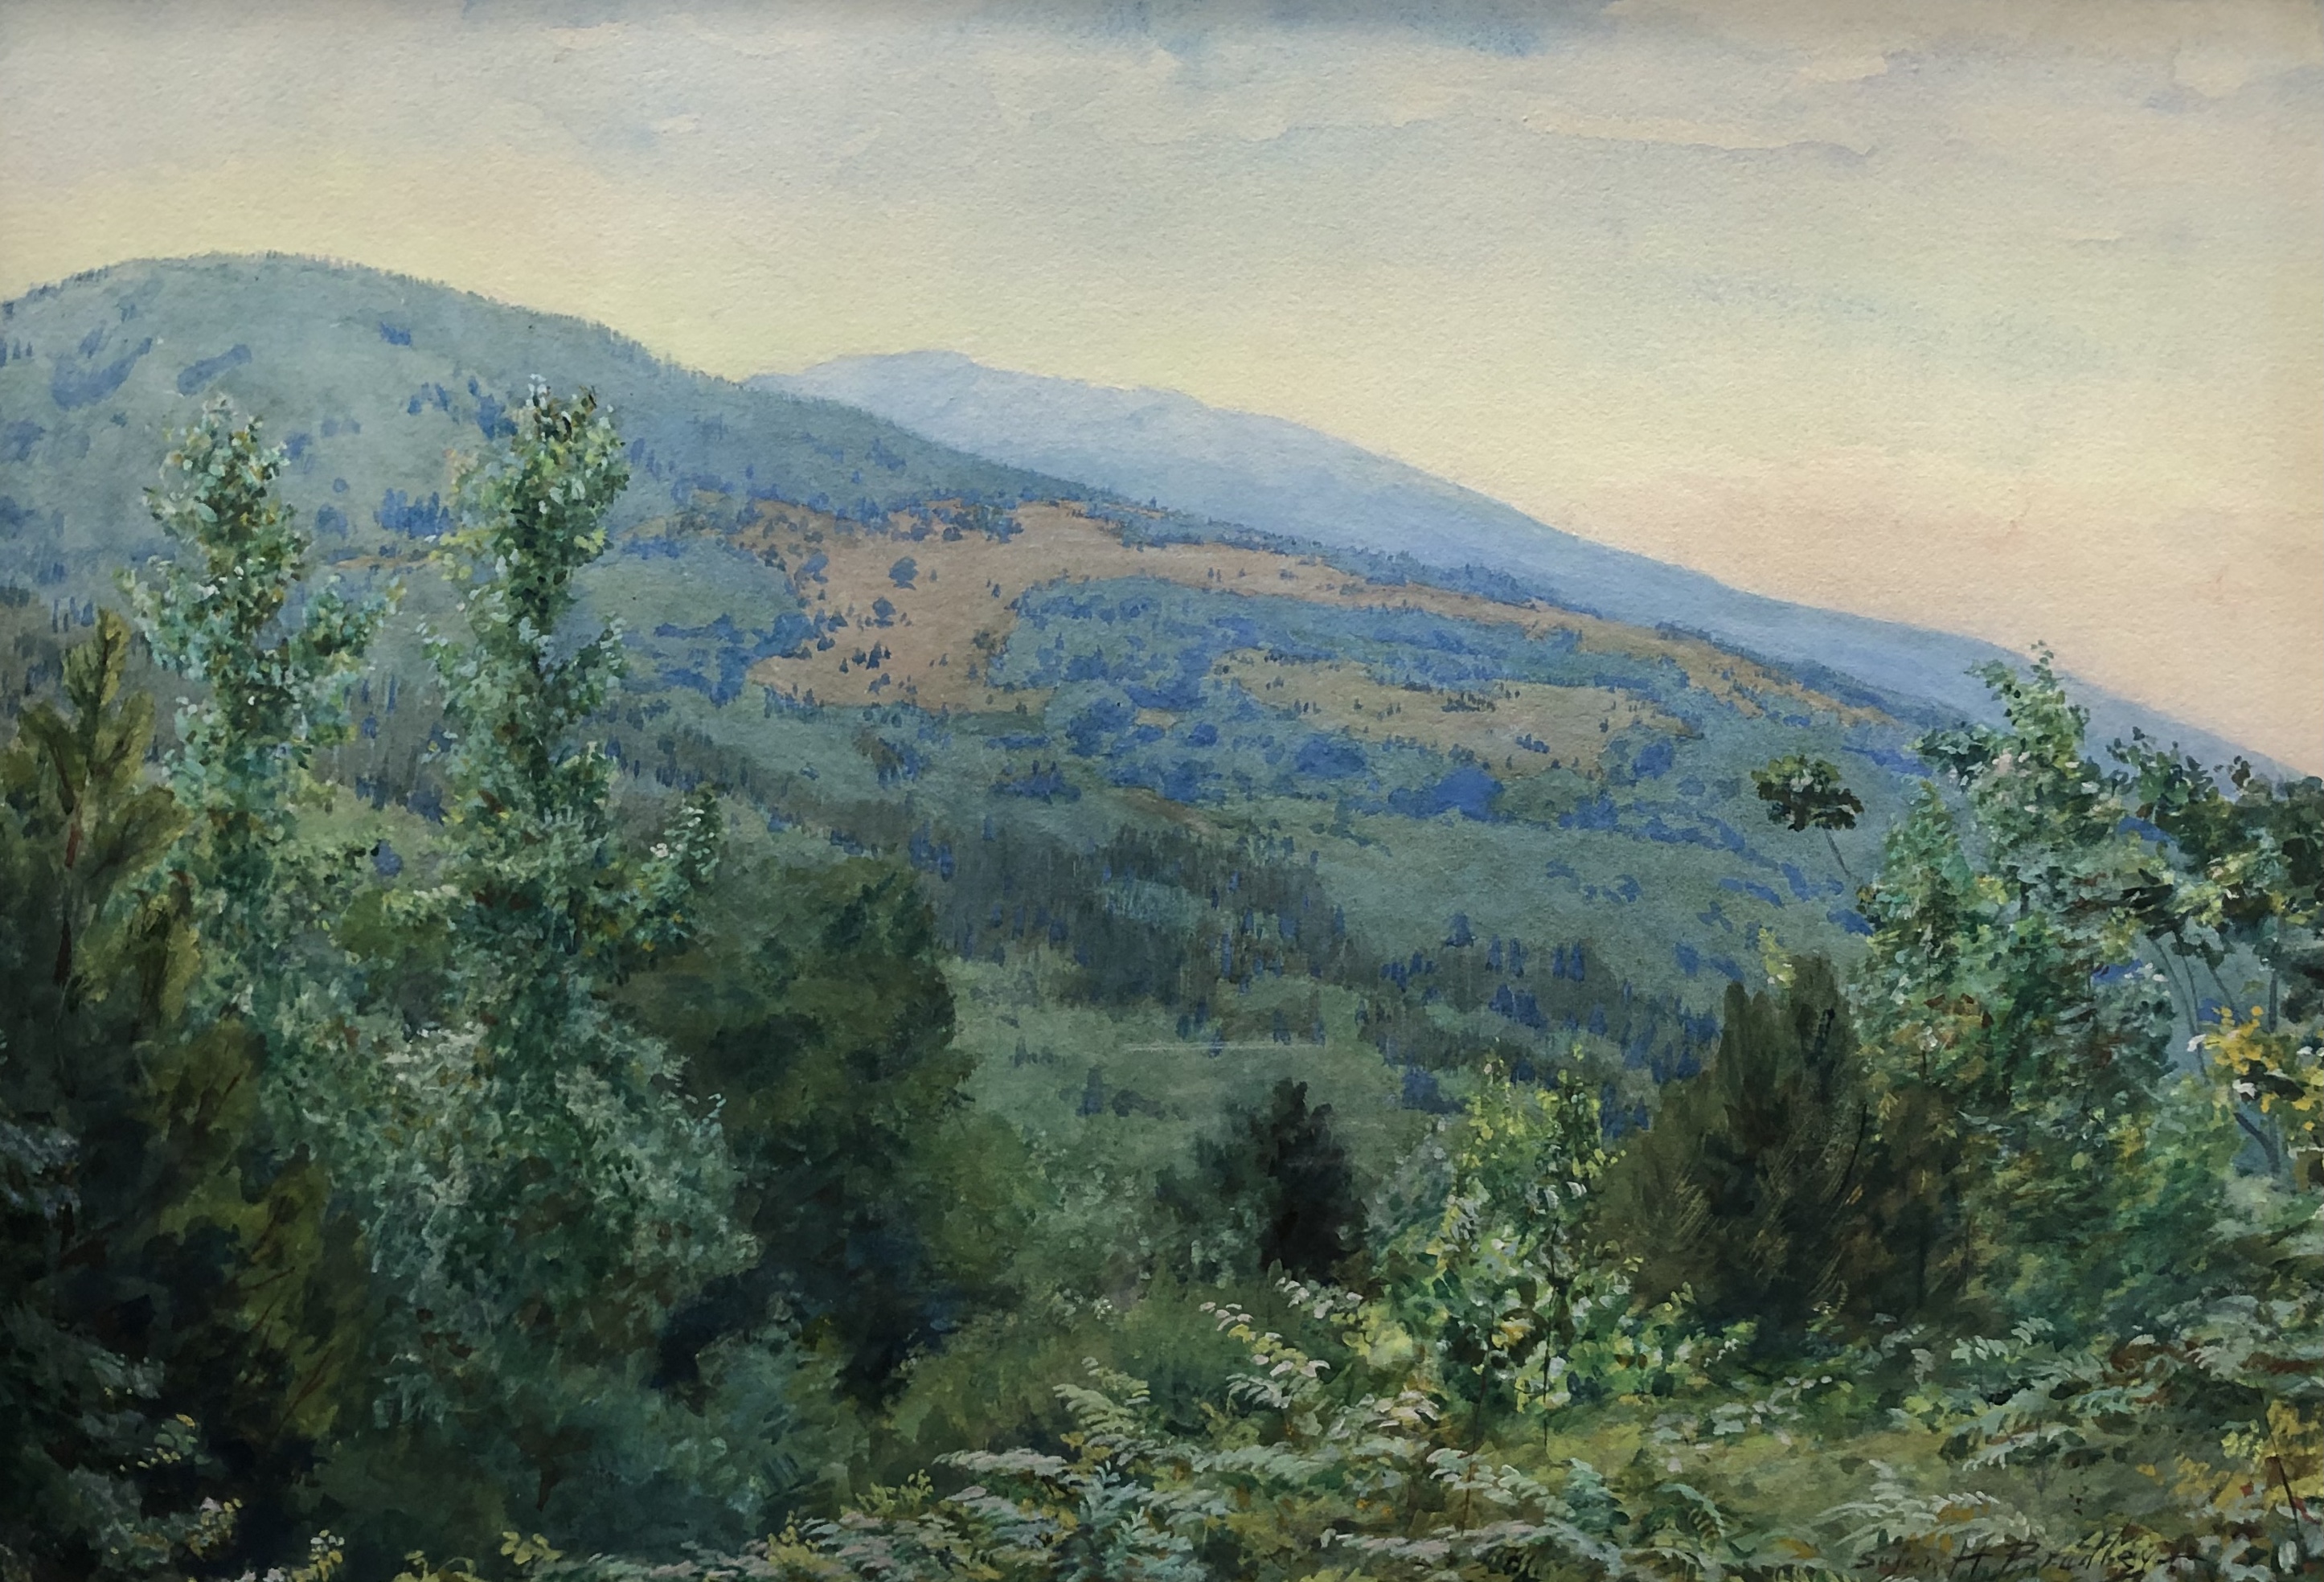 A watercolor painting features a serene landscape with many green trees in the foreground and two slightly sloped mountains in the background against a hazy sky.